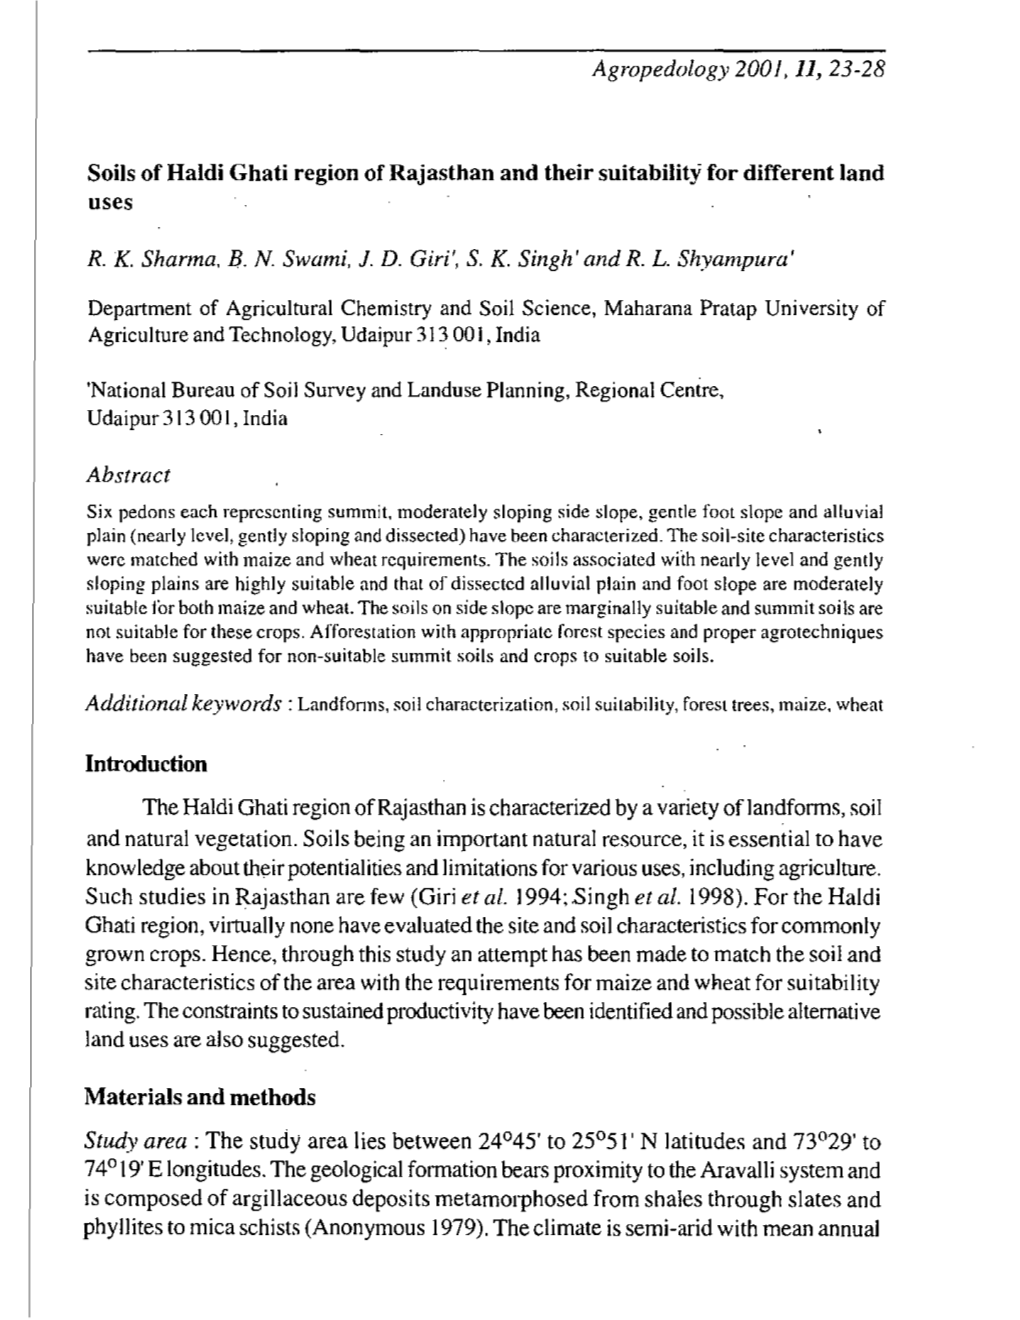 11, 23-28 Soils of Haldi Ghati Region of Rajasthan and Their Suitability For